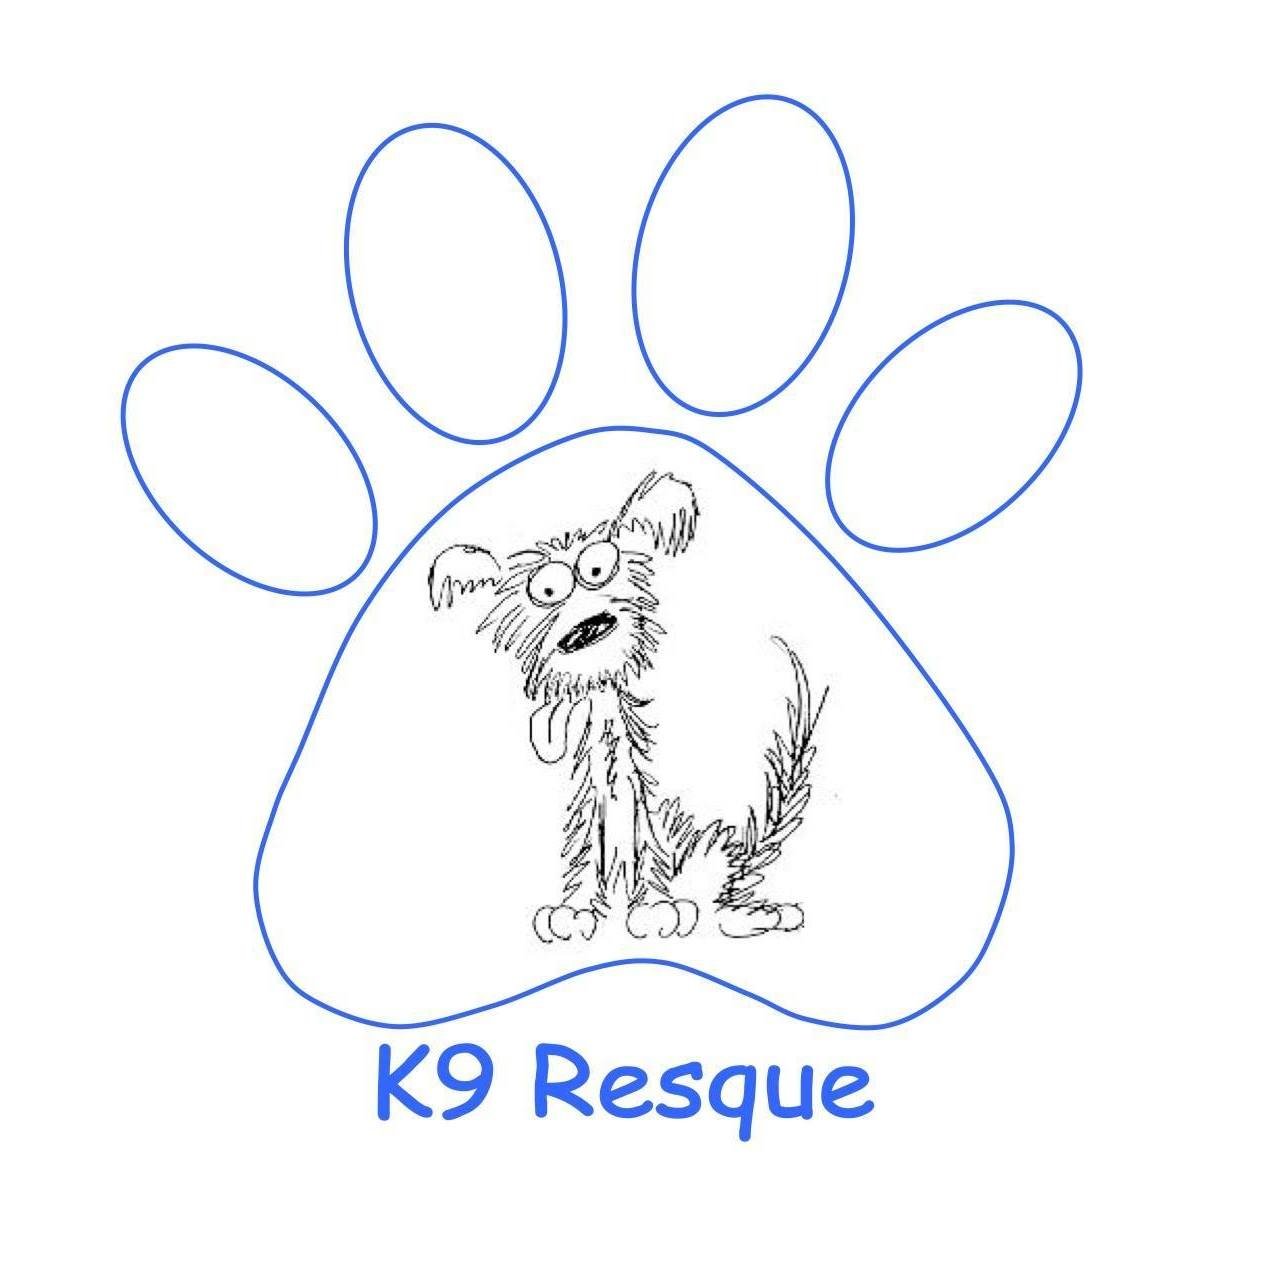 K9 Resque has been operating in Okeechobee for the past seven years.